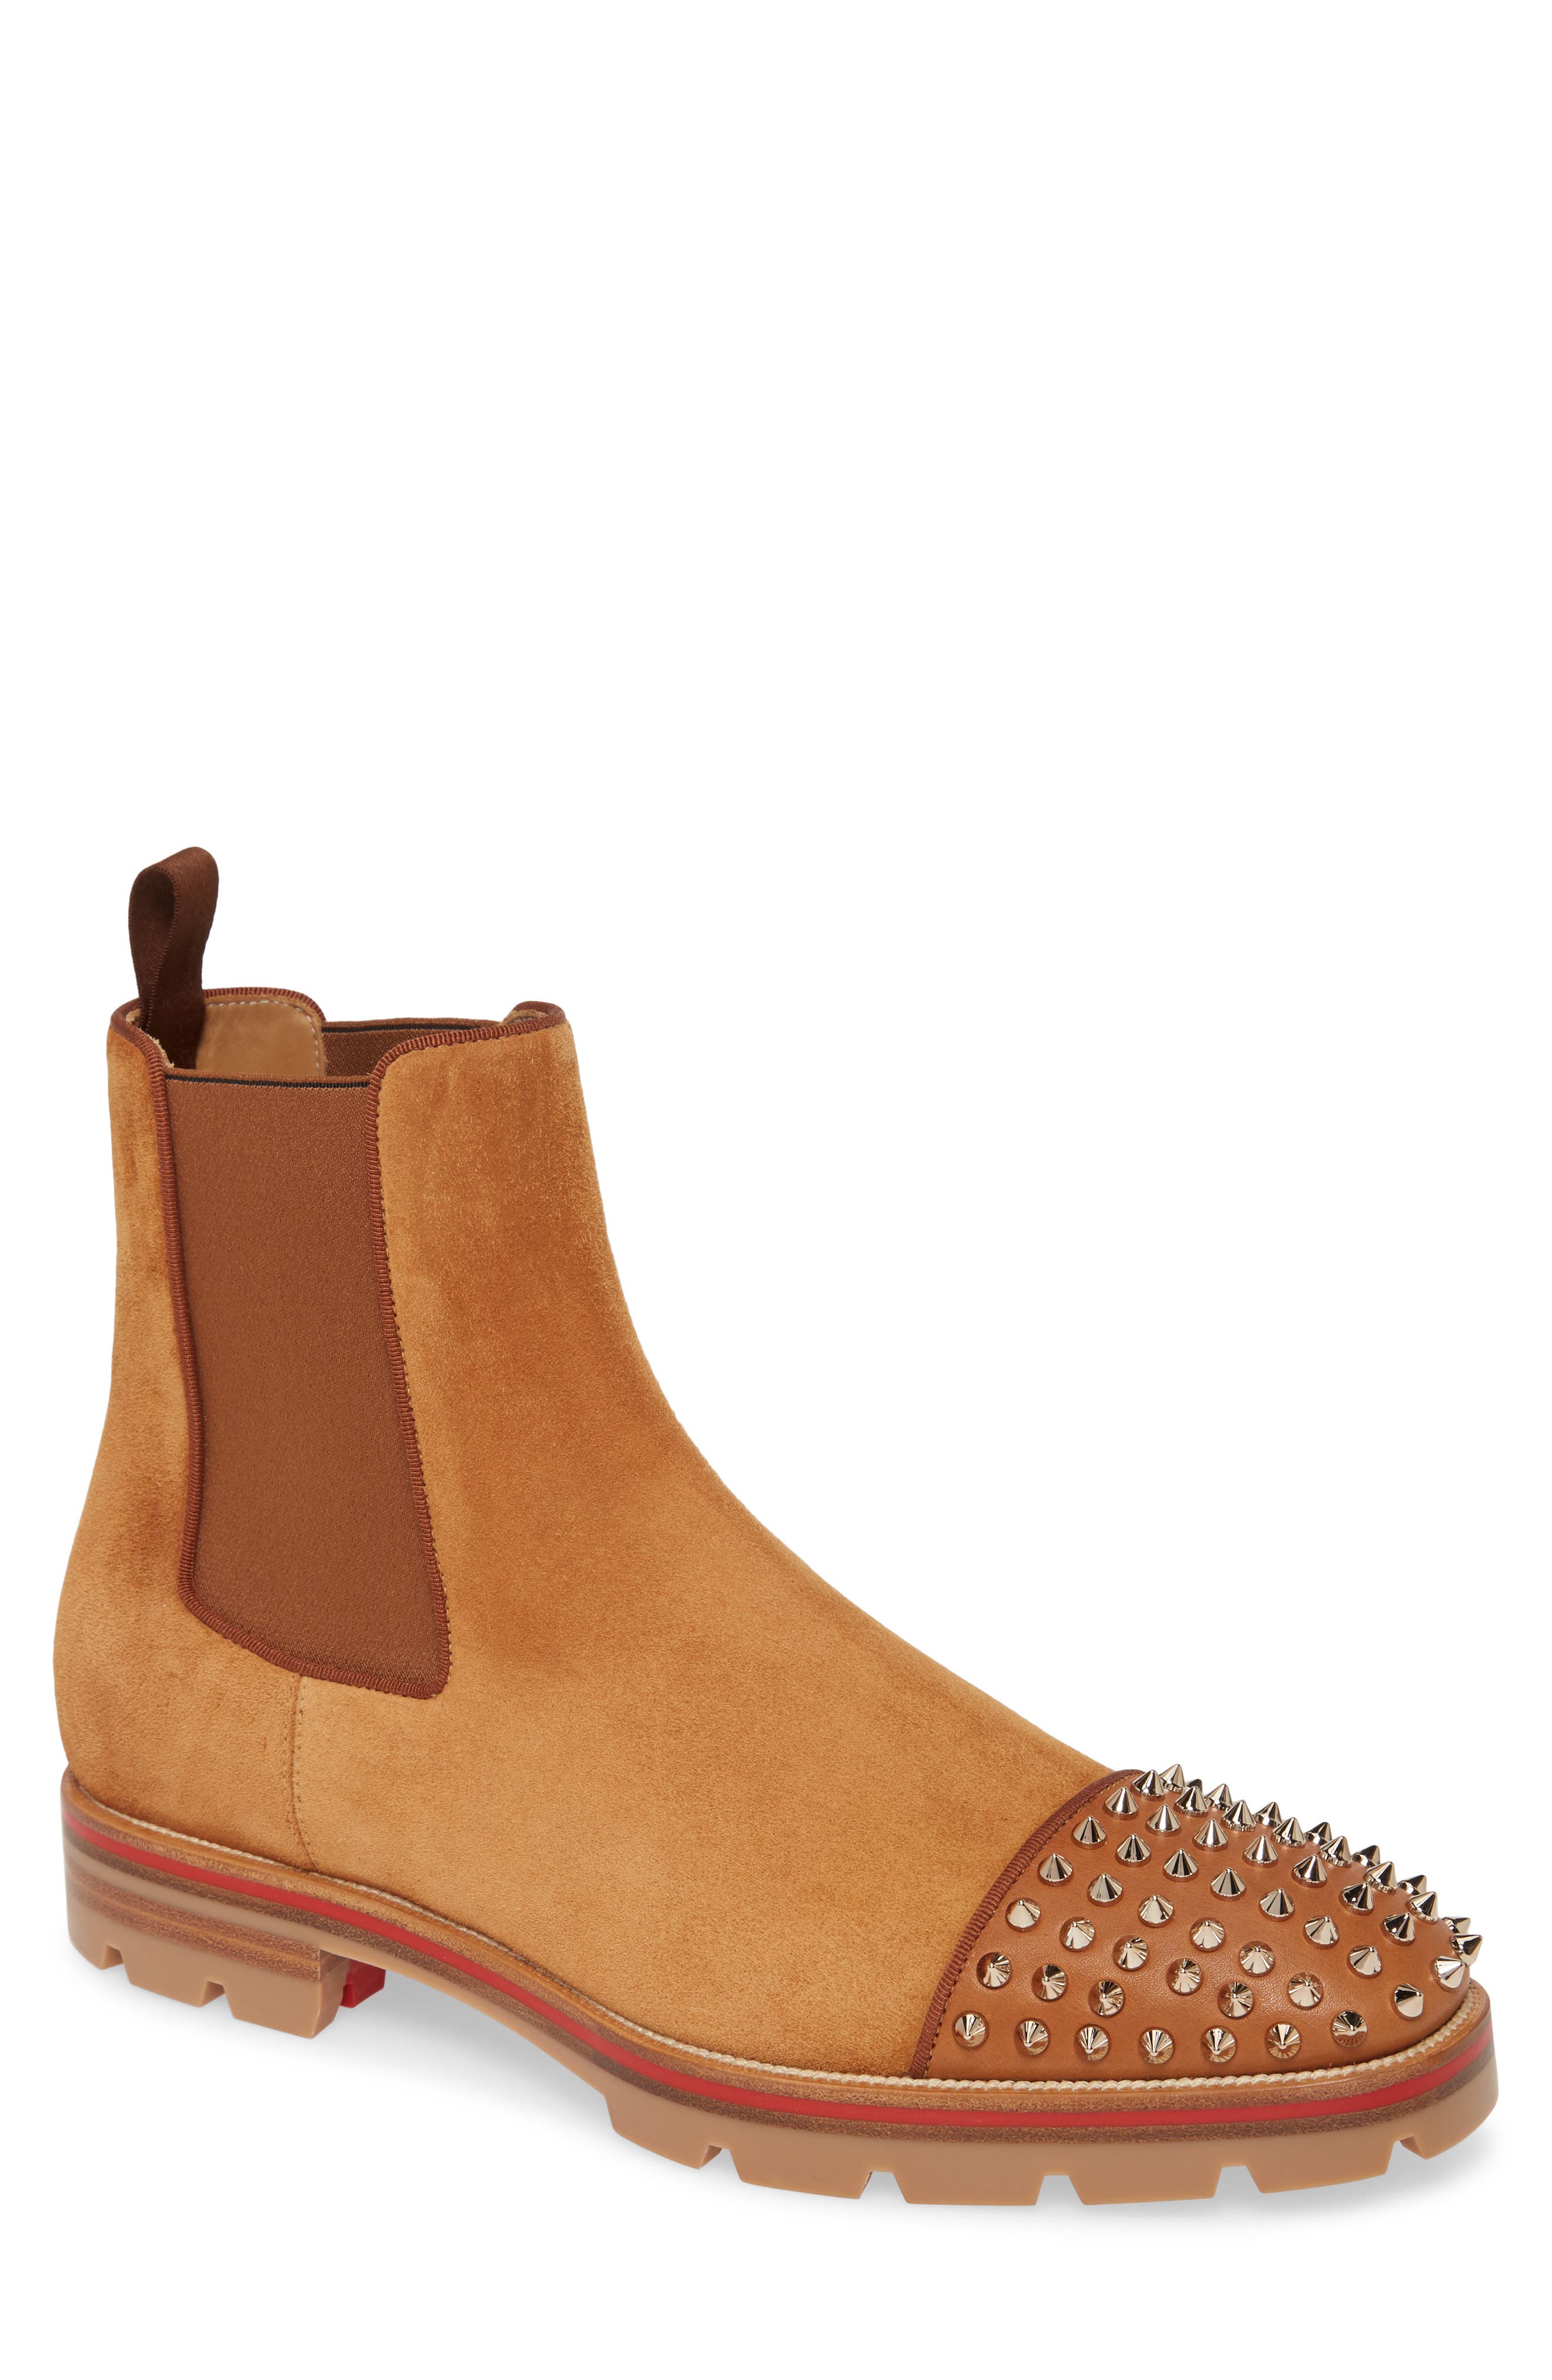 louboutin studded chelsea boots